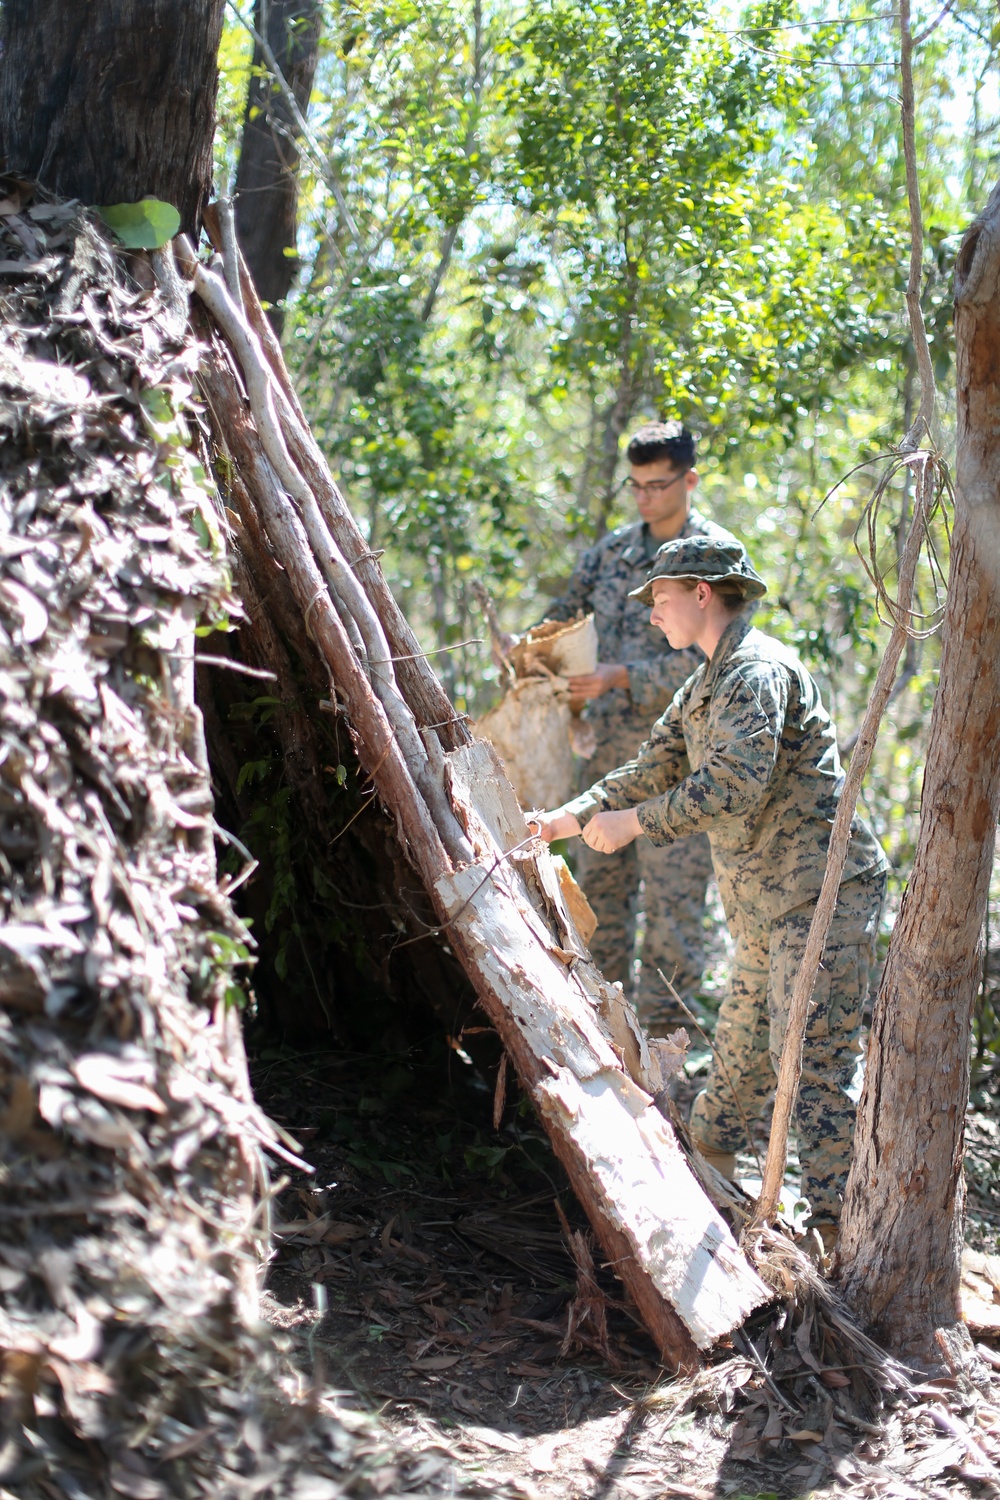 DVIDS - Images - Marines Participate in Bushcraft Survival Course [Image 6  of 6]